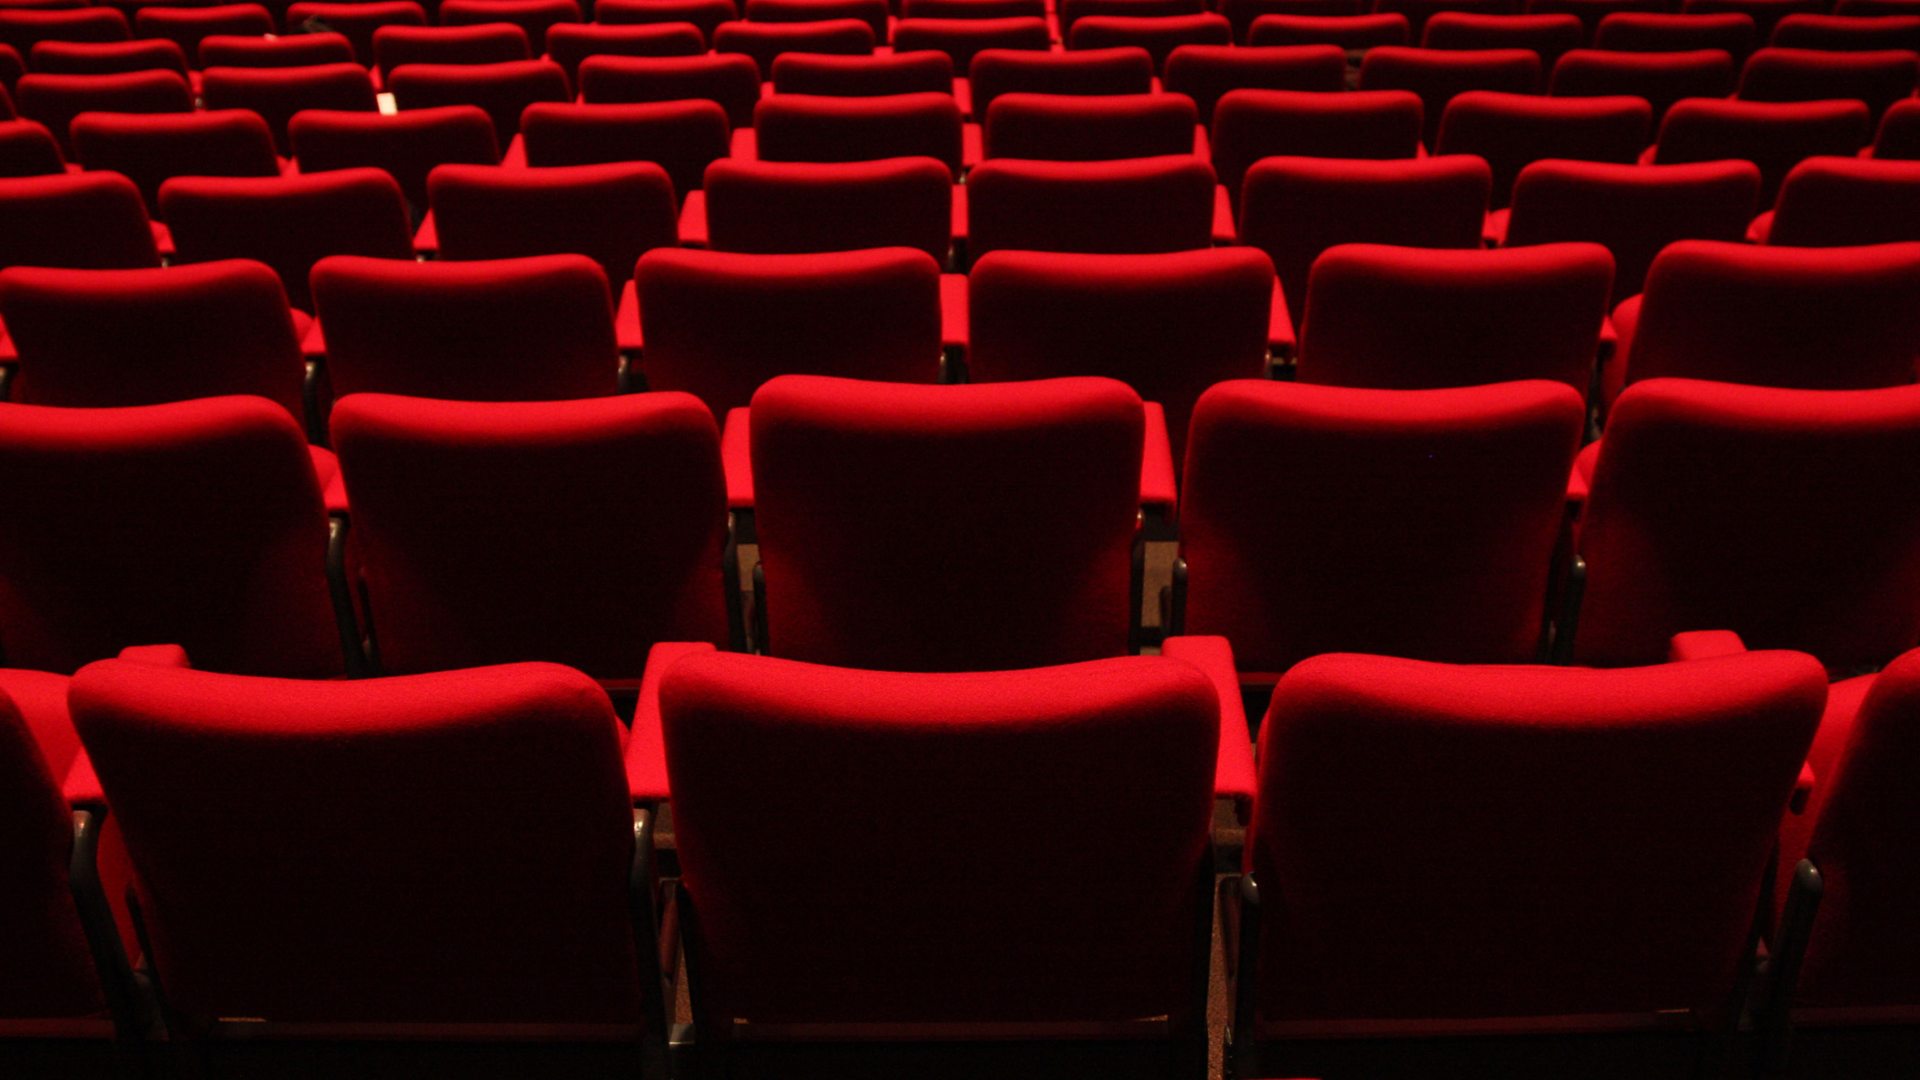 Theatre seating. Theater Seats. Seats at the Theatre. Audience Seating. Cheaper Seats in Theatre.